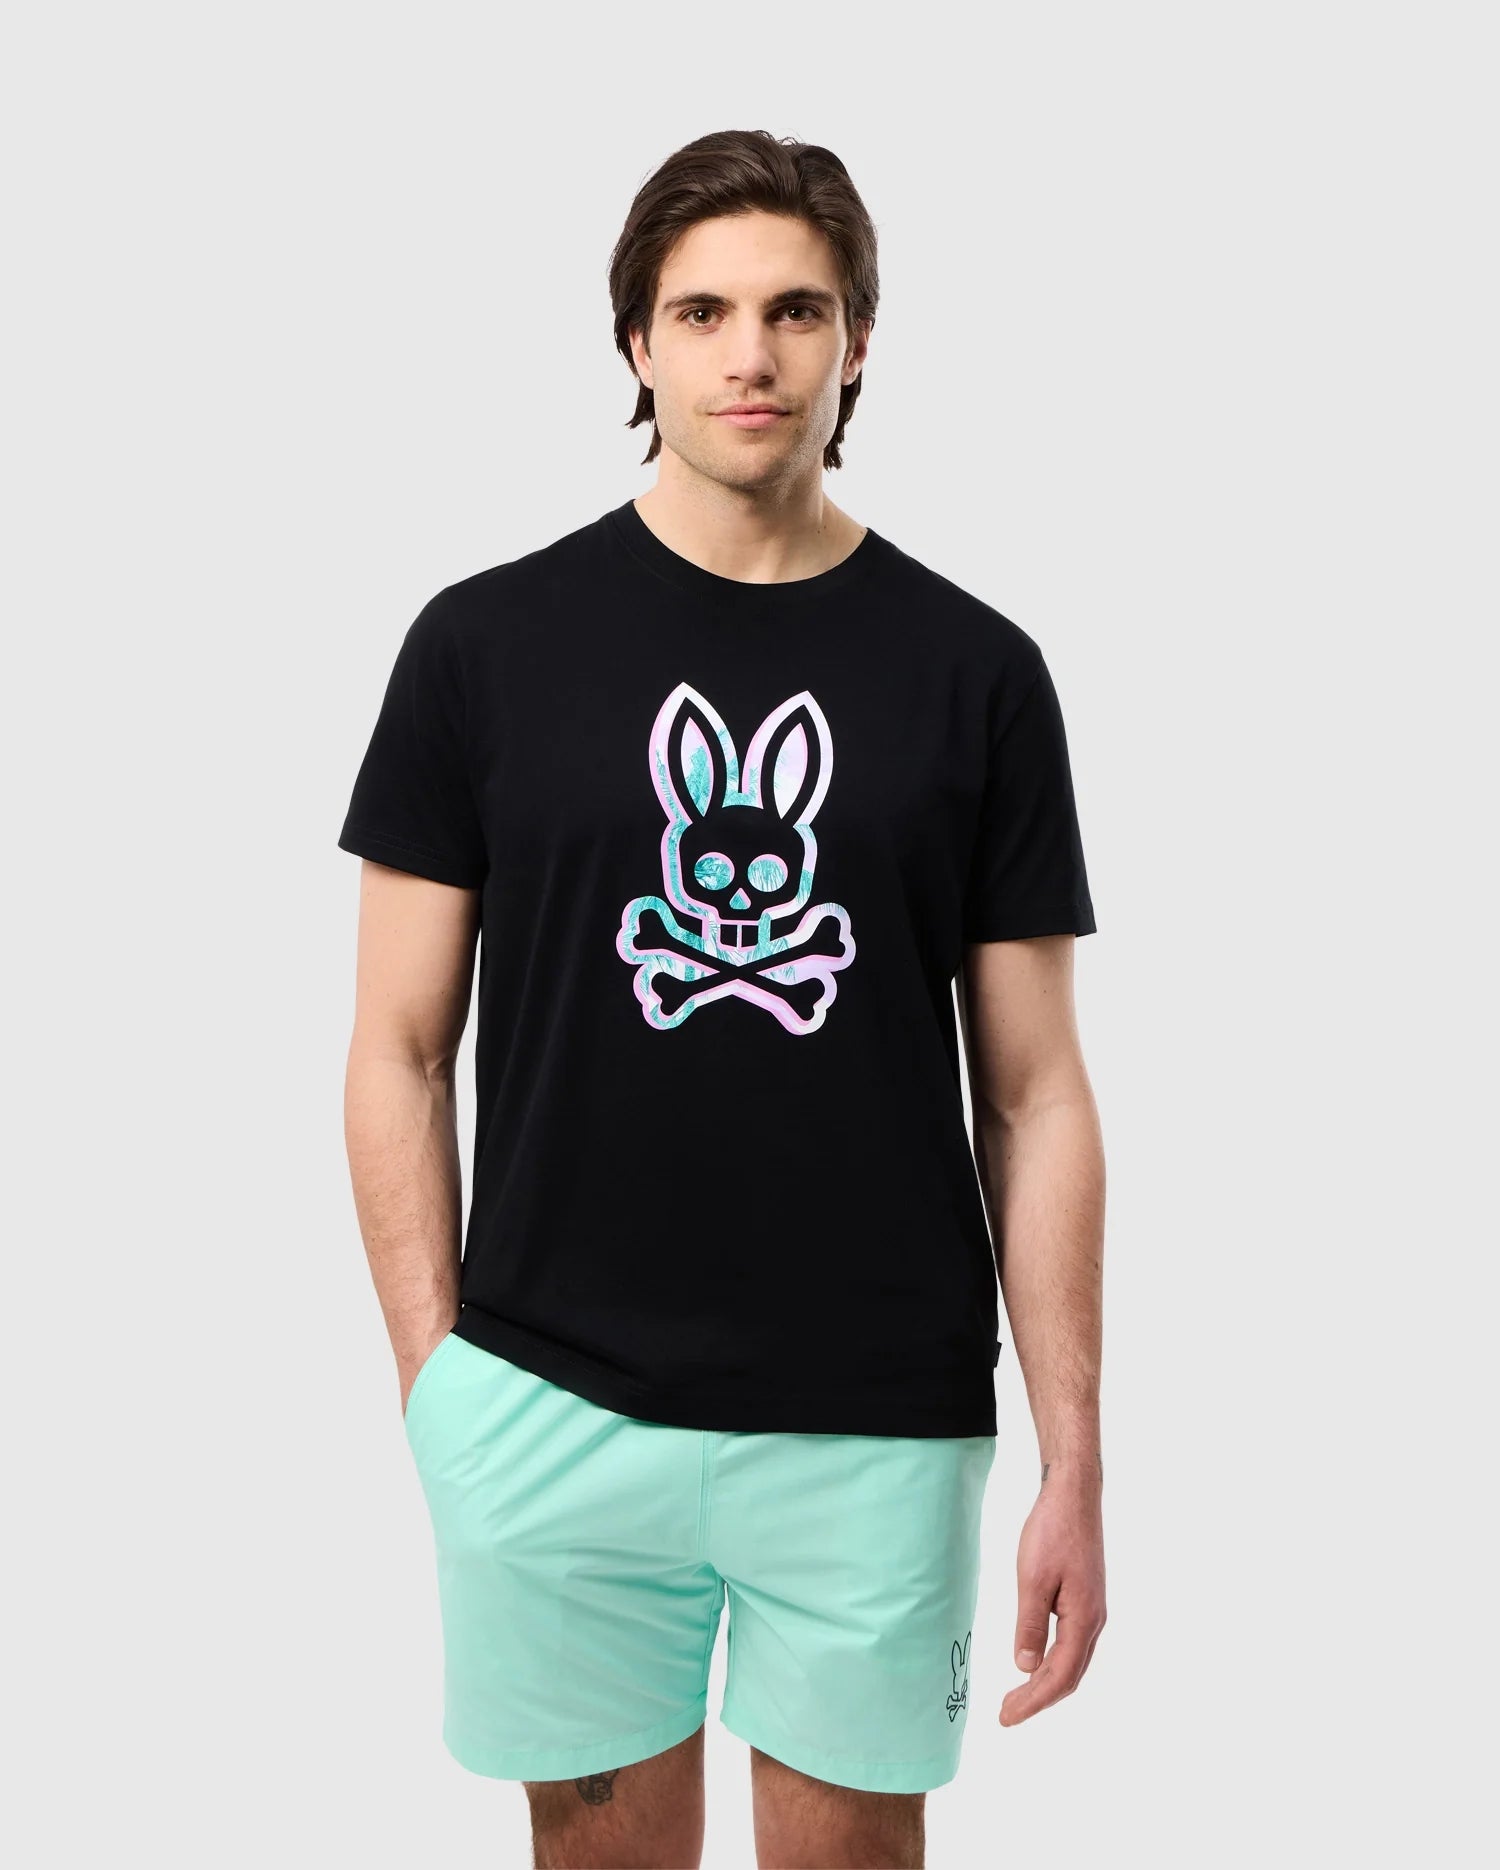 A man with medium-length brown hair is wearing a high-quality Psycho Bunny MENS LEONARD GRAPHIC TEE - B6U609C200 featuring a colorful skull and crossbones with bunny ears graphic. Made from luxurious Pima cotton, the black T-shirt pairs perfectly with his mint green shorts against the plain light gray background.